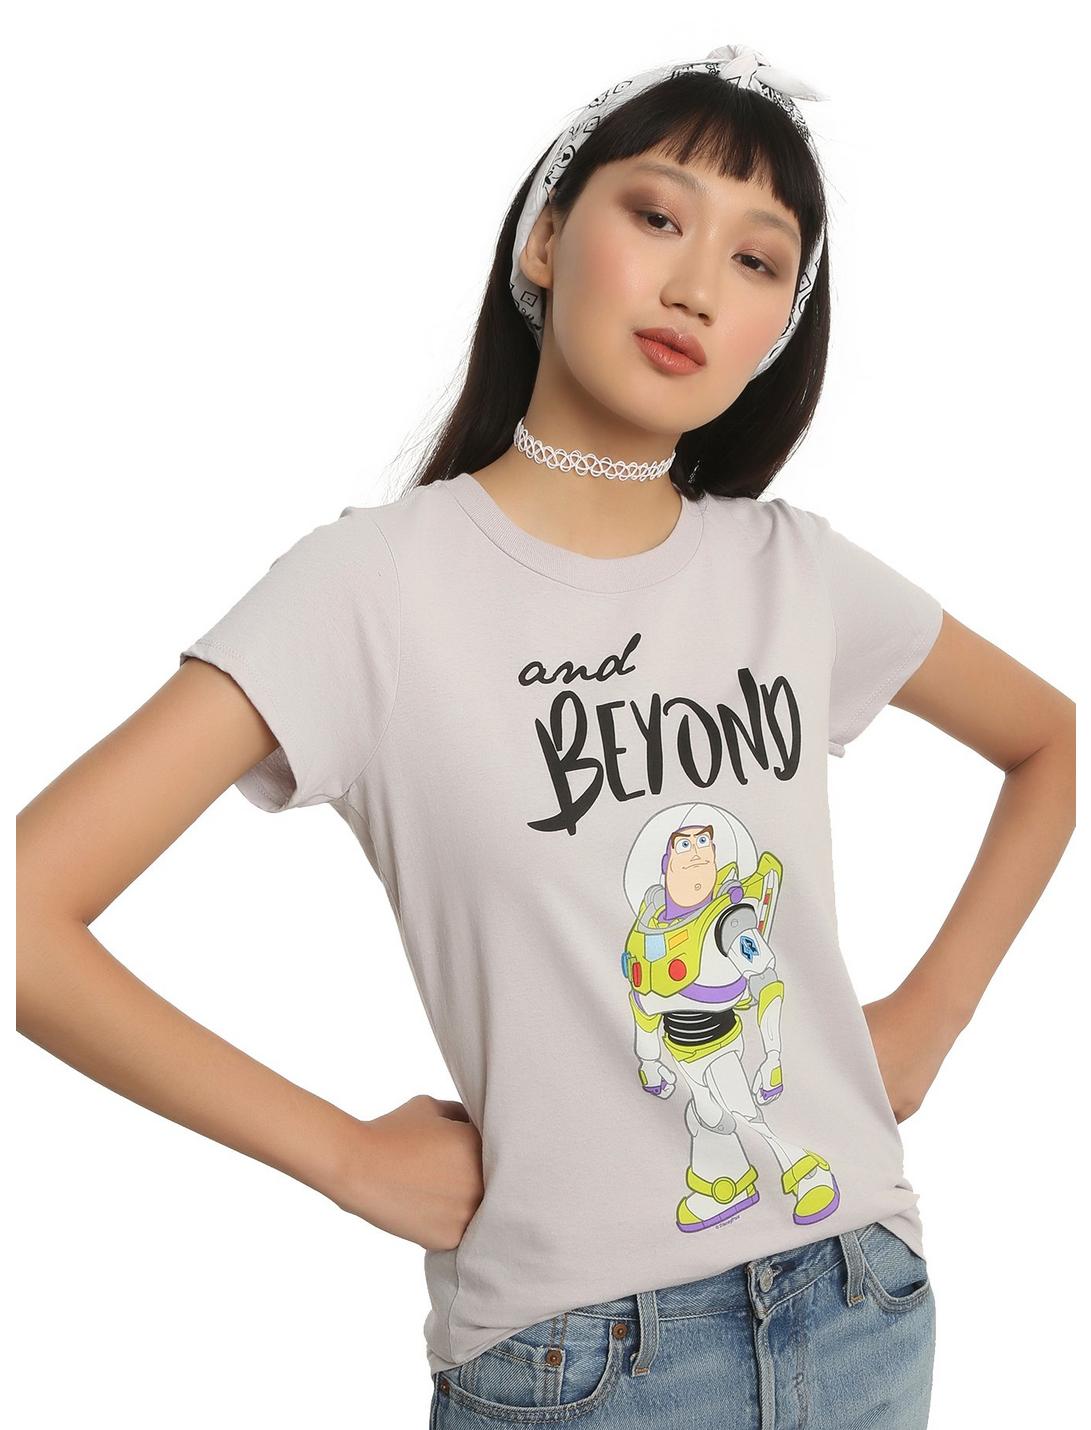 Toy Story Buzz Lightyear And Beyond Girls T-Shirt, GREY, hi-res